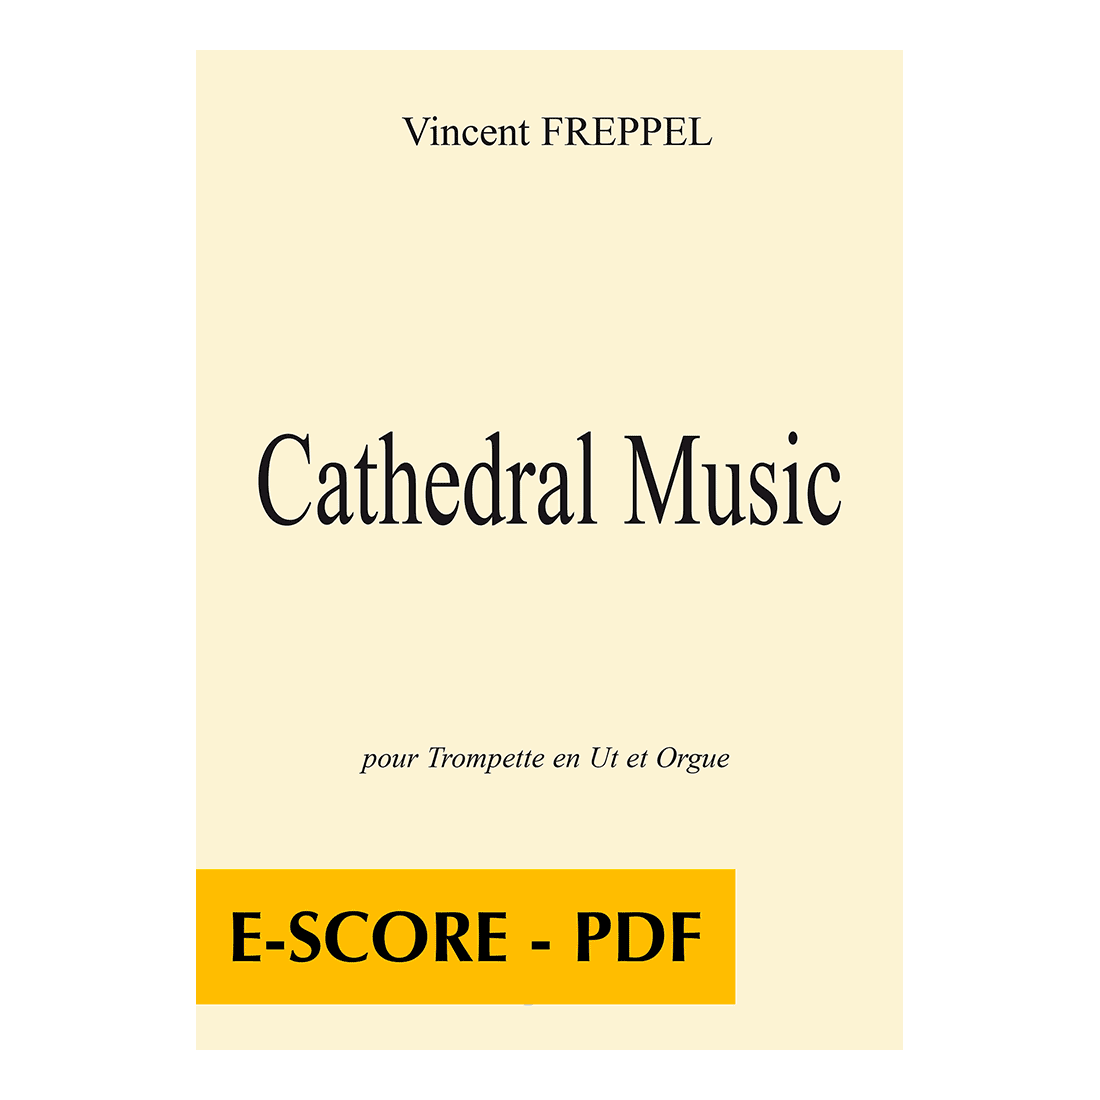 Cathedral Music for C trumpet and organ - E-score PDF